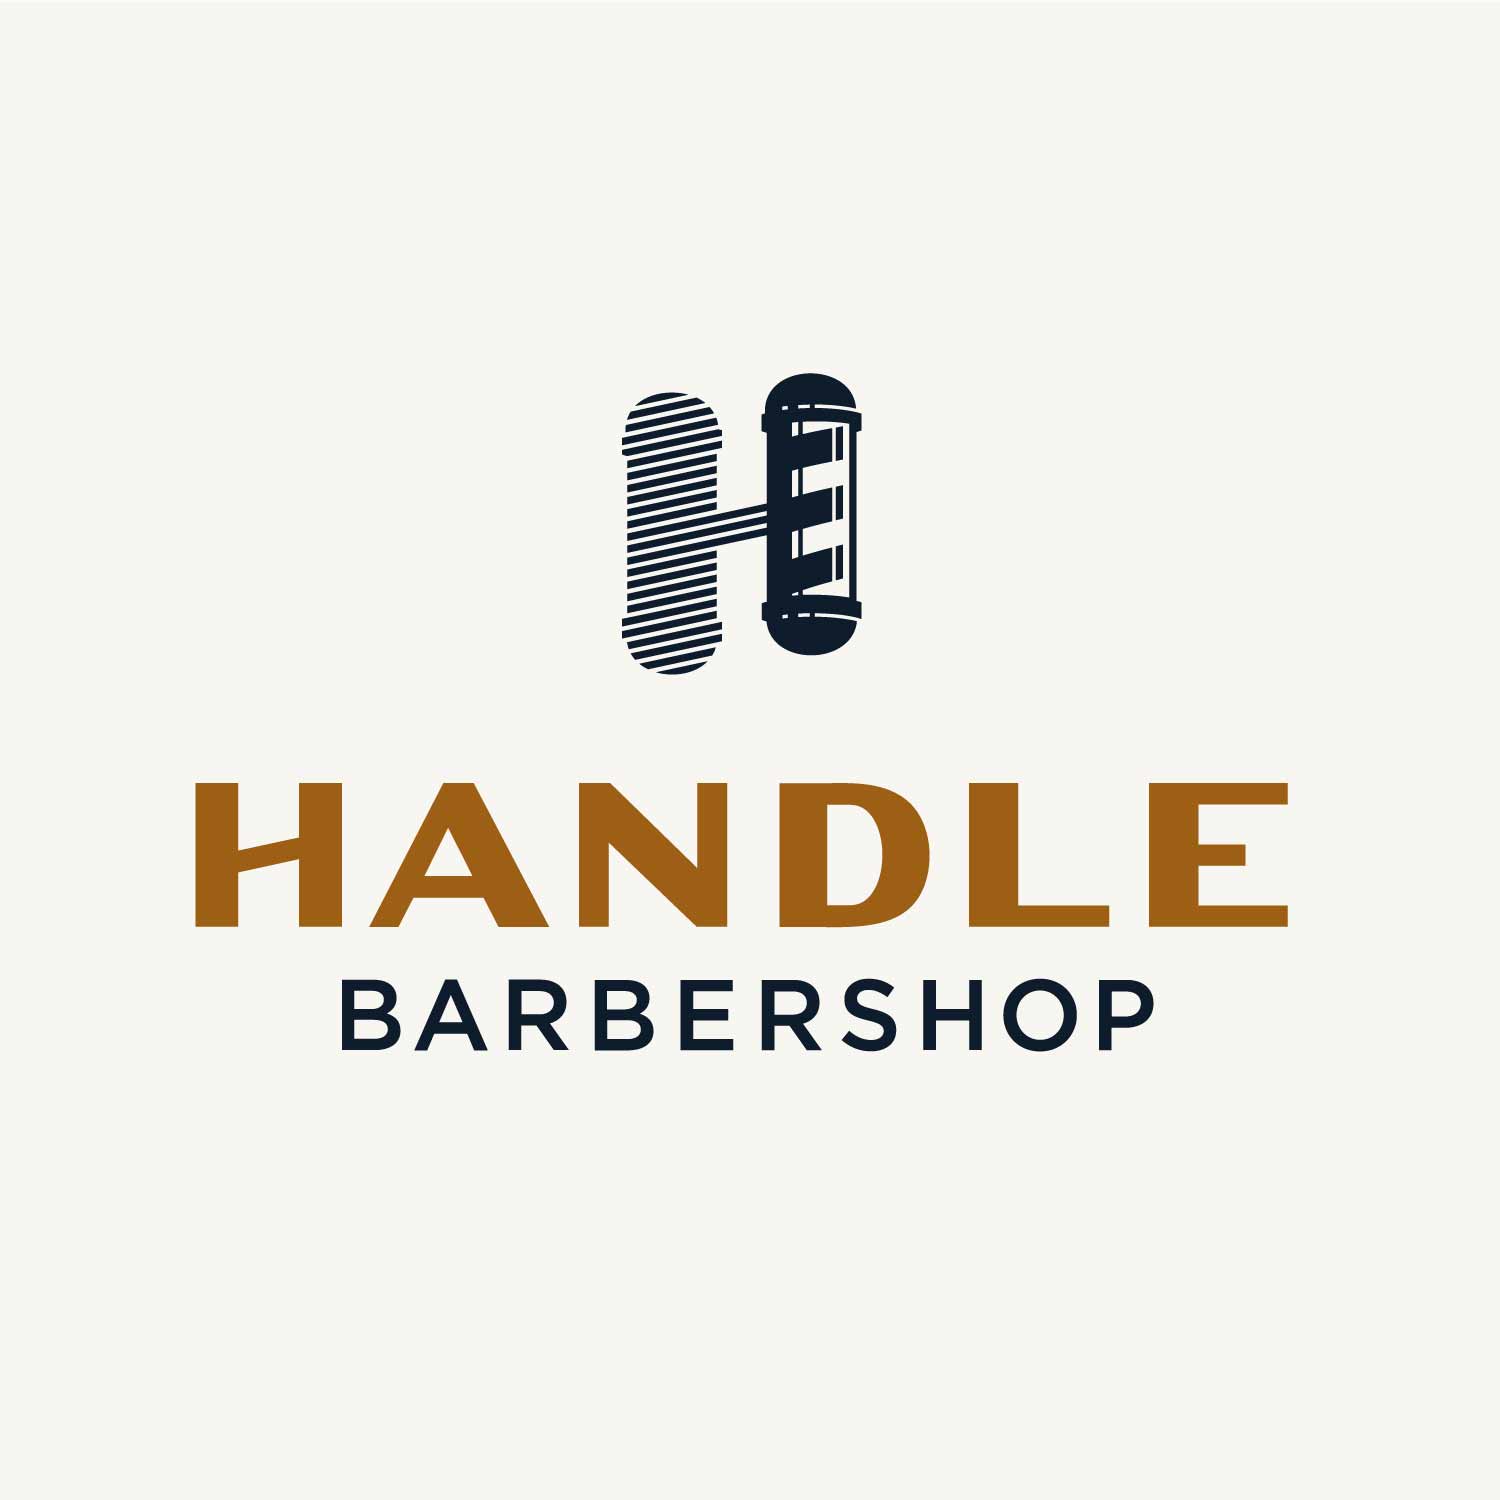 Full Handle Barbershop logo with shadowed parlor pole H—by Hunter Oden of oden.house